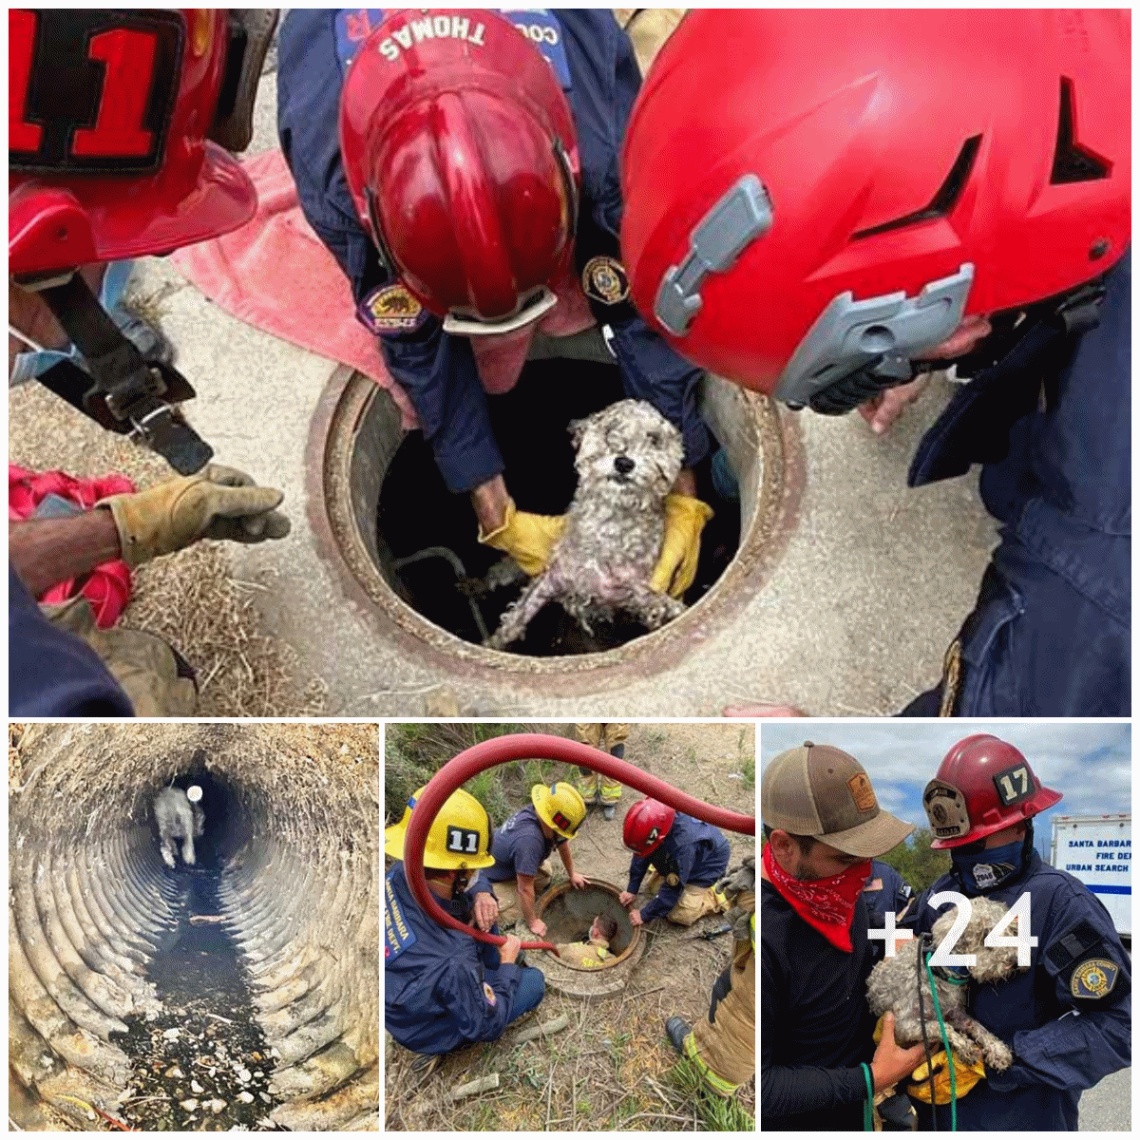 Firefighters discovered that a small dog crying for help had been trapped in a drainage pipe for more than three days and had exhausted its strength.